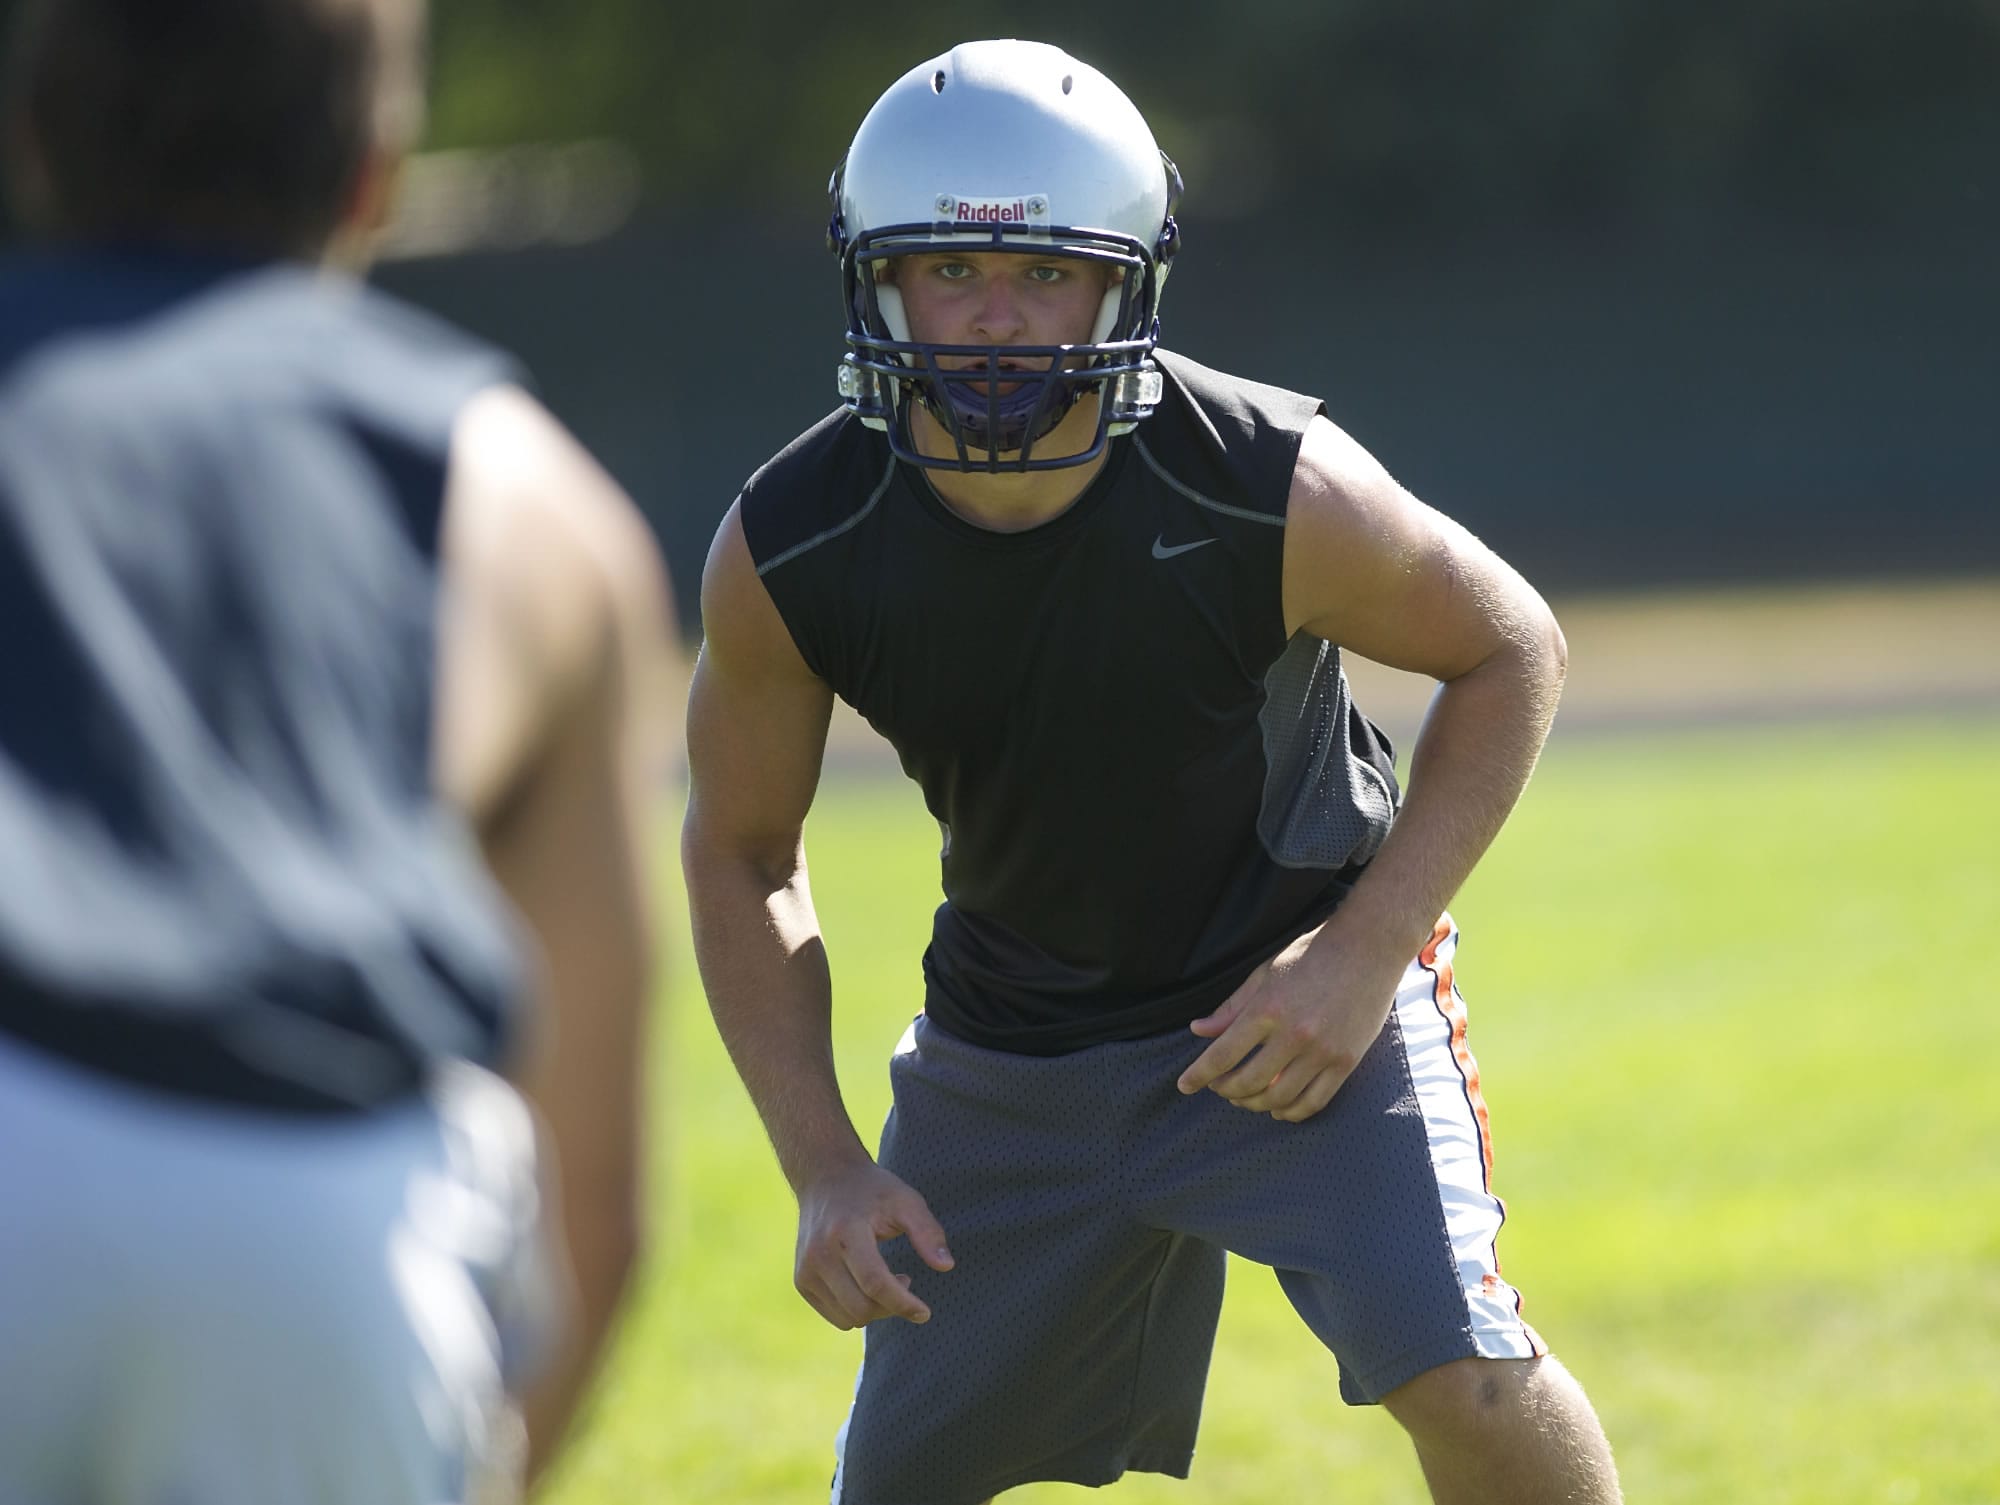 Heritage junior Aaren Morring said he looked up to last season's starting linebackers and worked is way up to a starting role by the middle of the 2011 season.